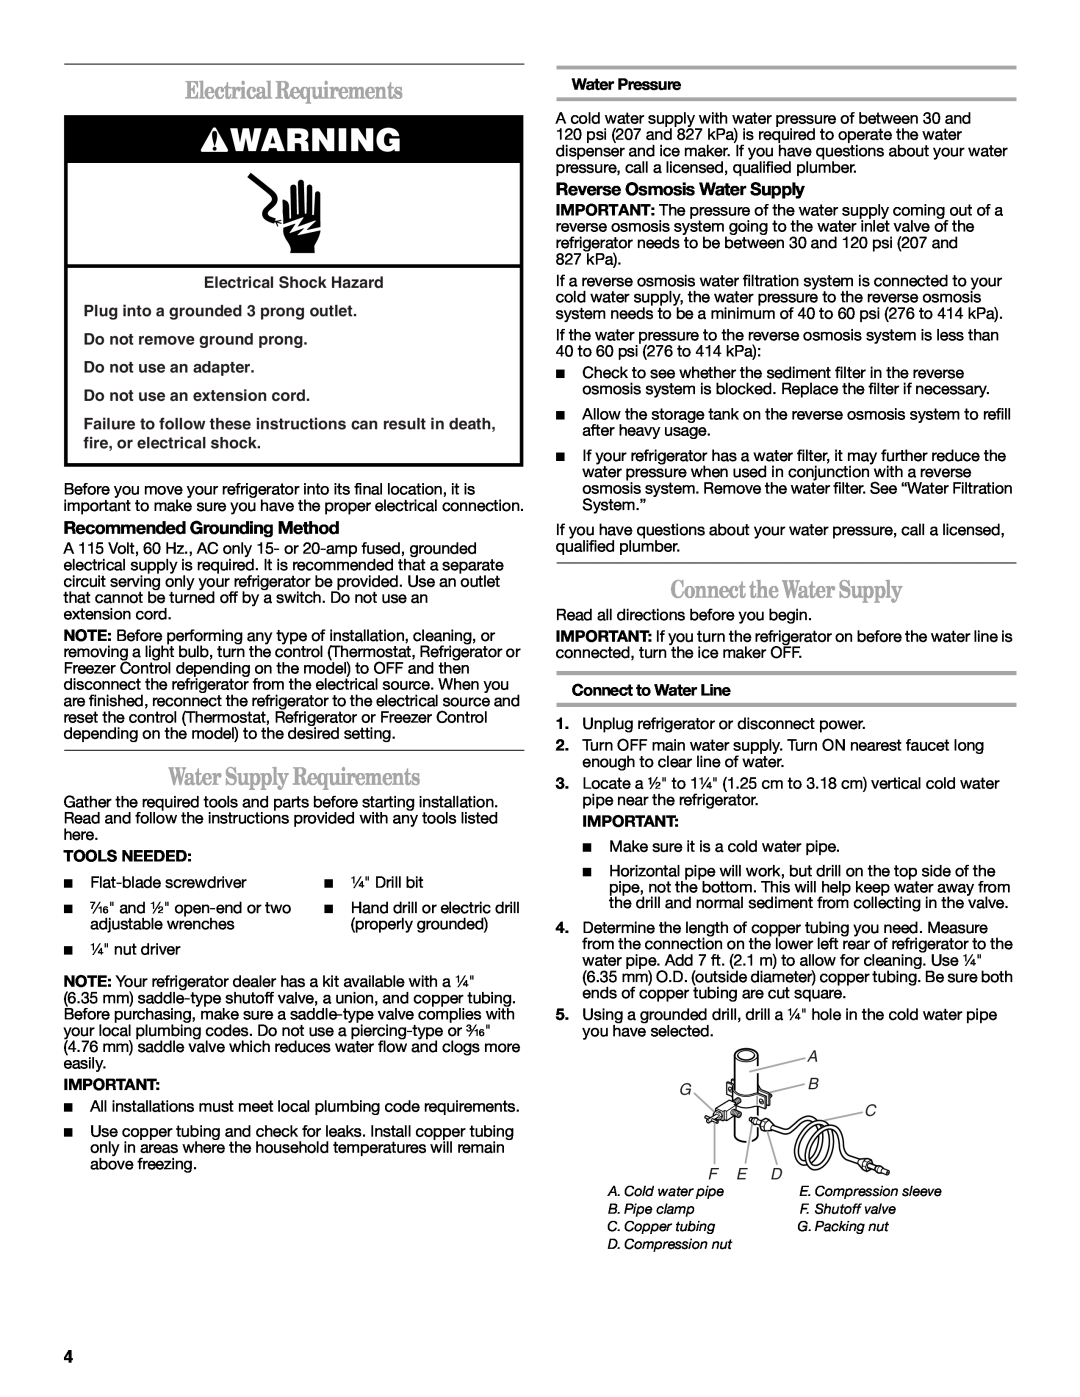 Whirlpool 2314473B warranty Electrical Requirements, Water Supply Requirements, ConnecttheWater Supply, Tools Needed 